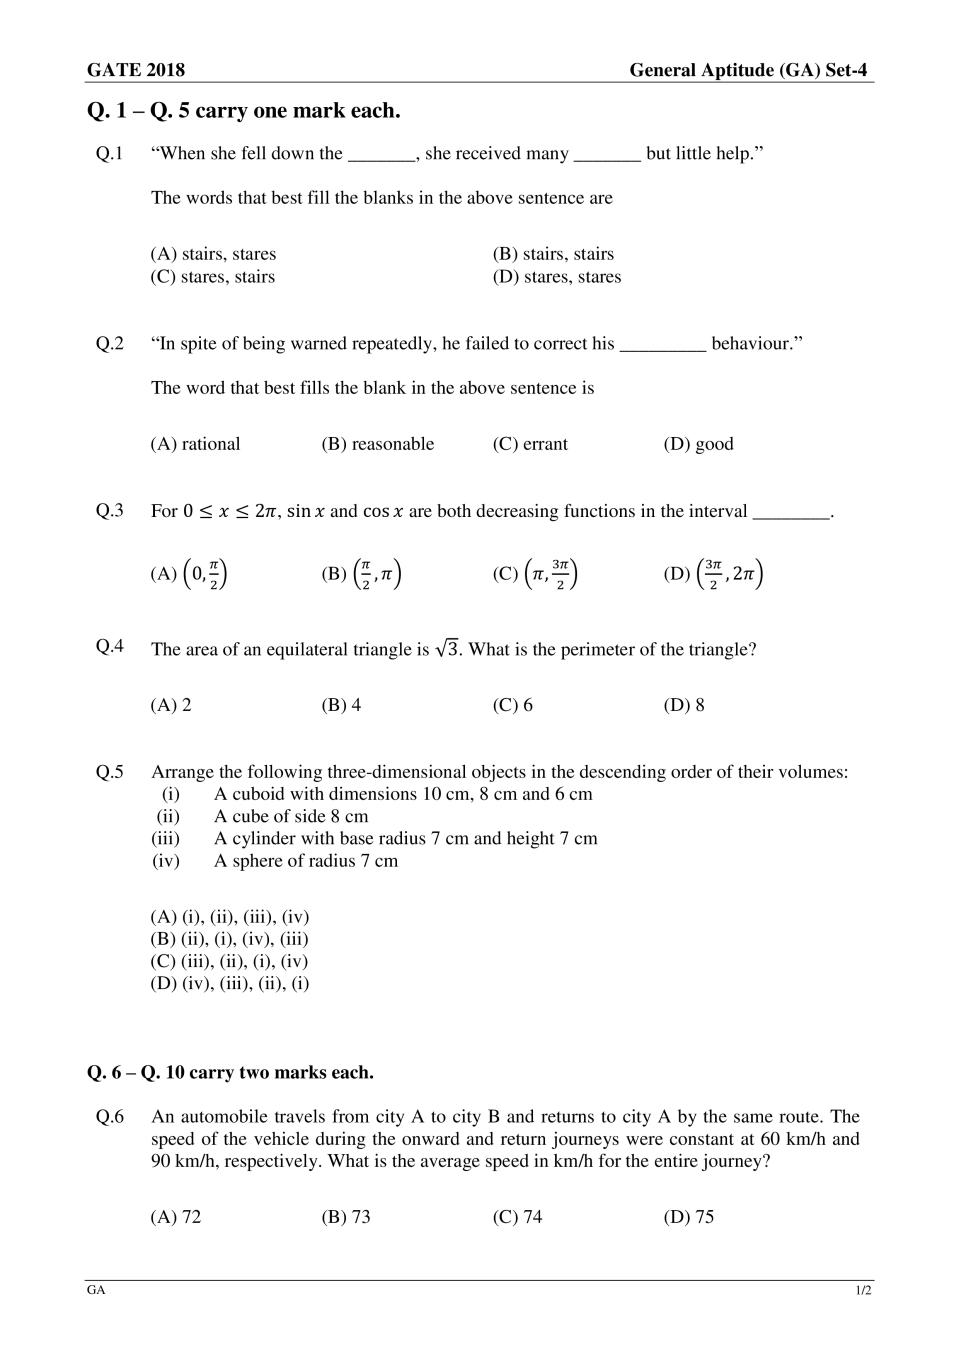 GATE 2018 Biotechnology (BT) Question Paper with Answer - Page 1